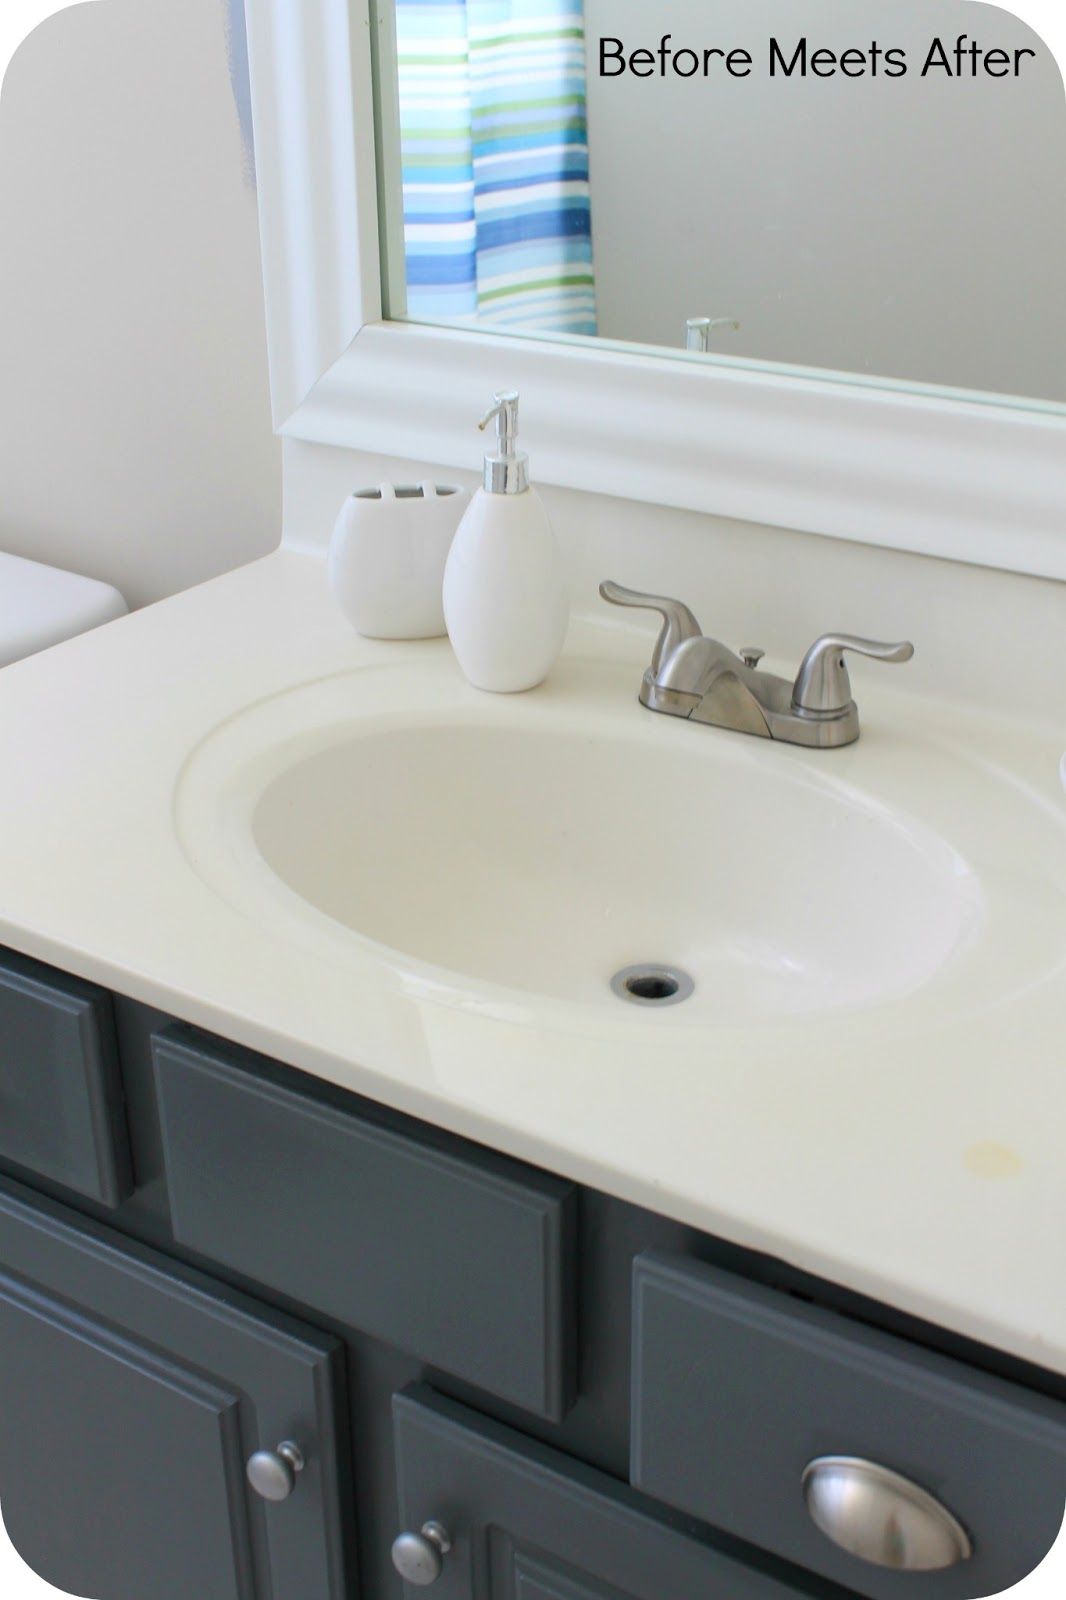 Bathroom vanity makeover with Annie Sloan Chalk Paint